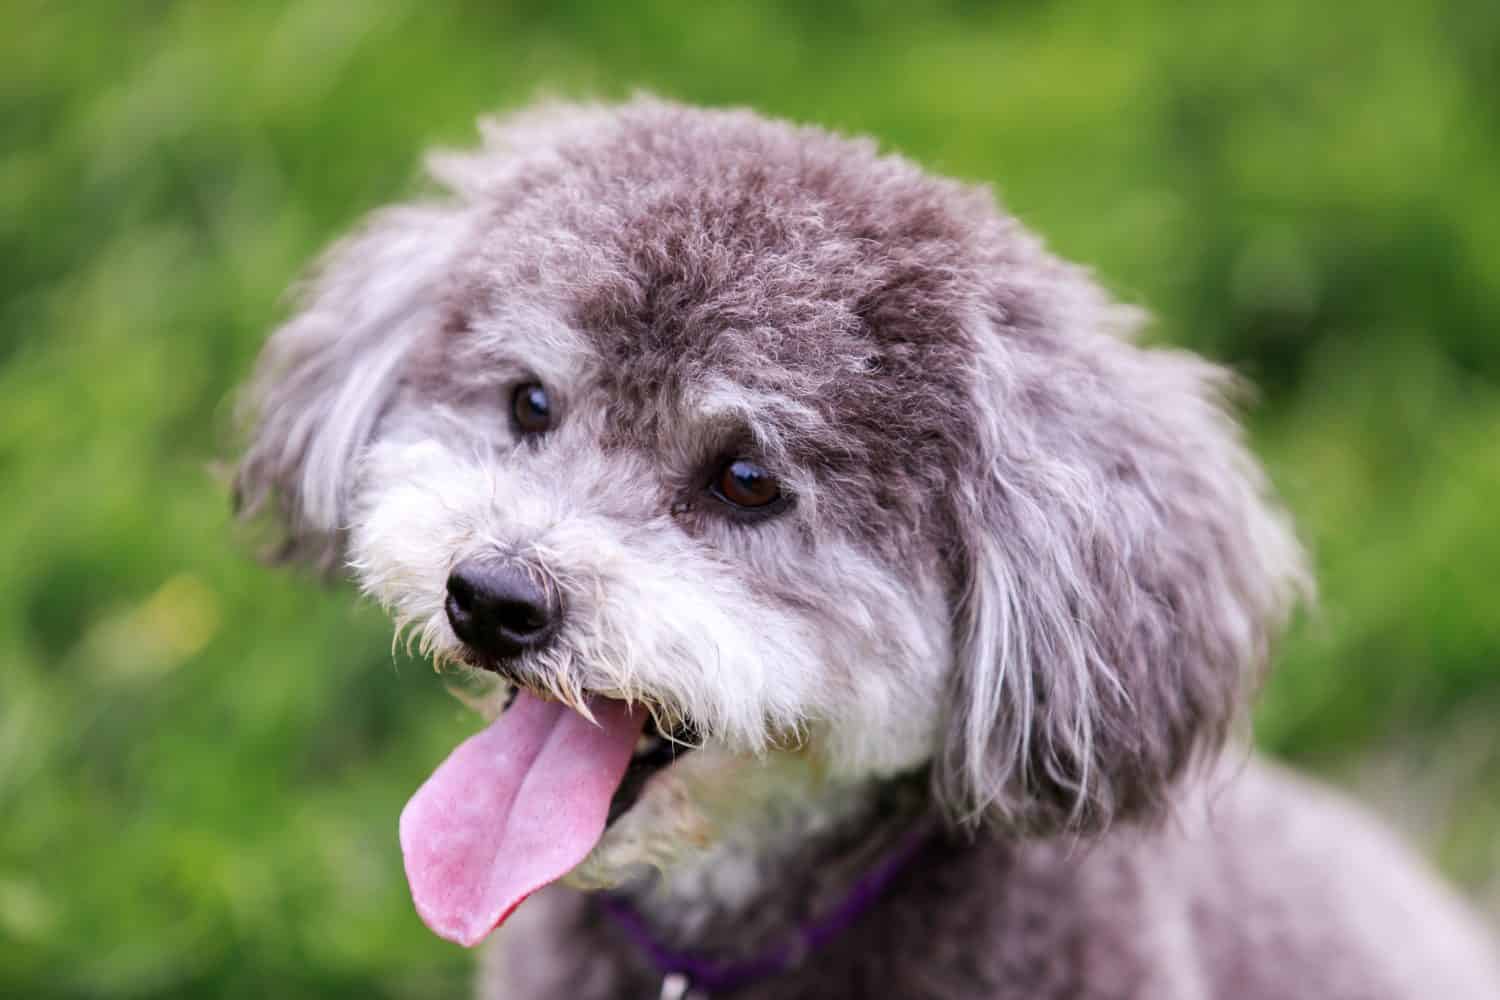 Schnoodle (cross between a schnauzer and a poodle) head shot. Off-leash park in Northern California.